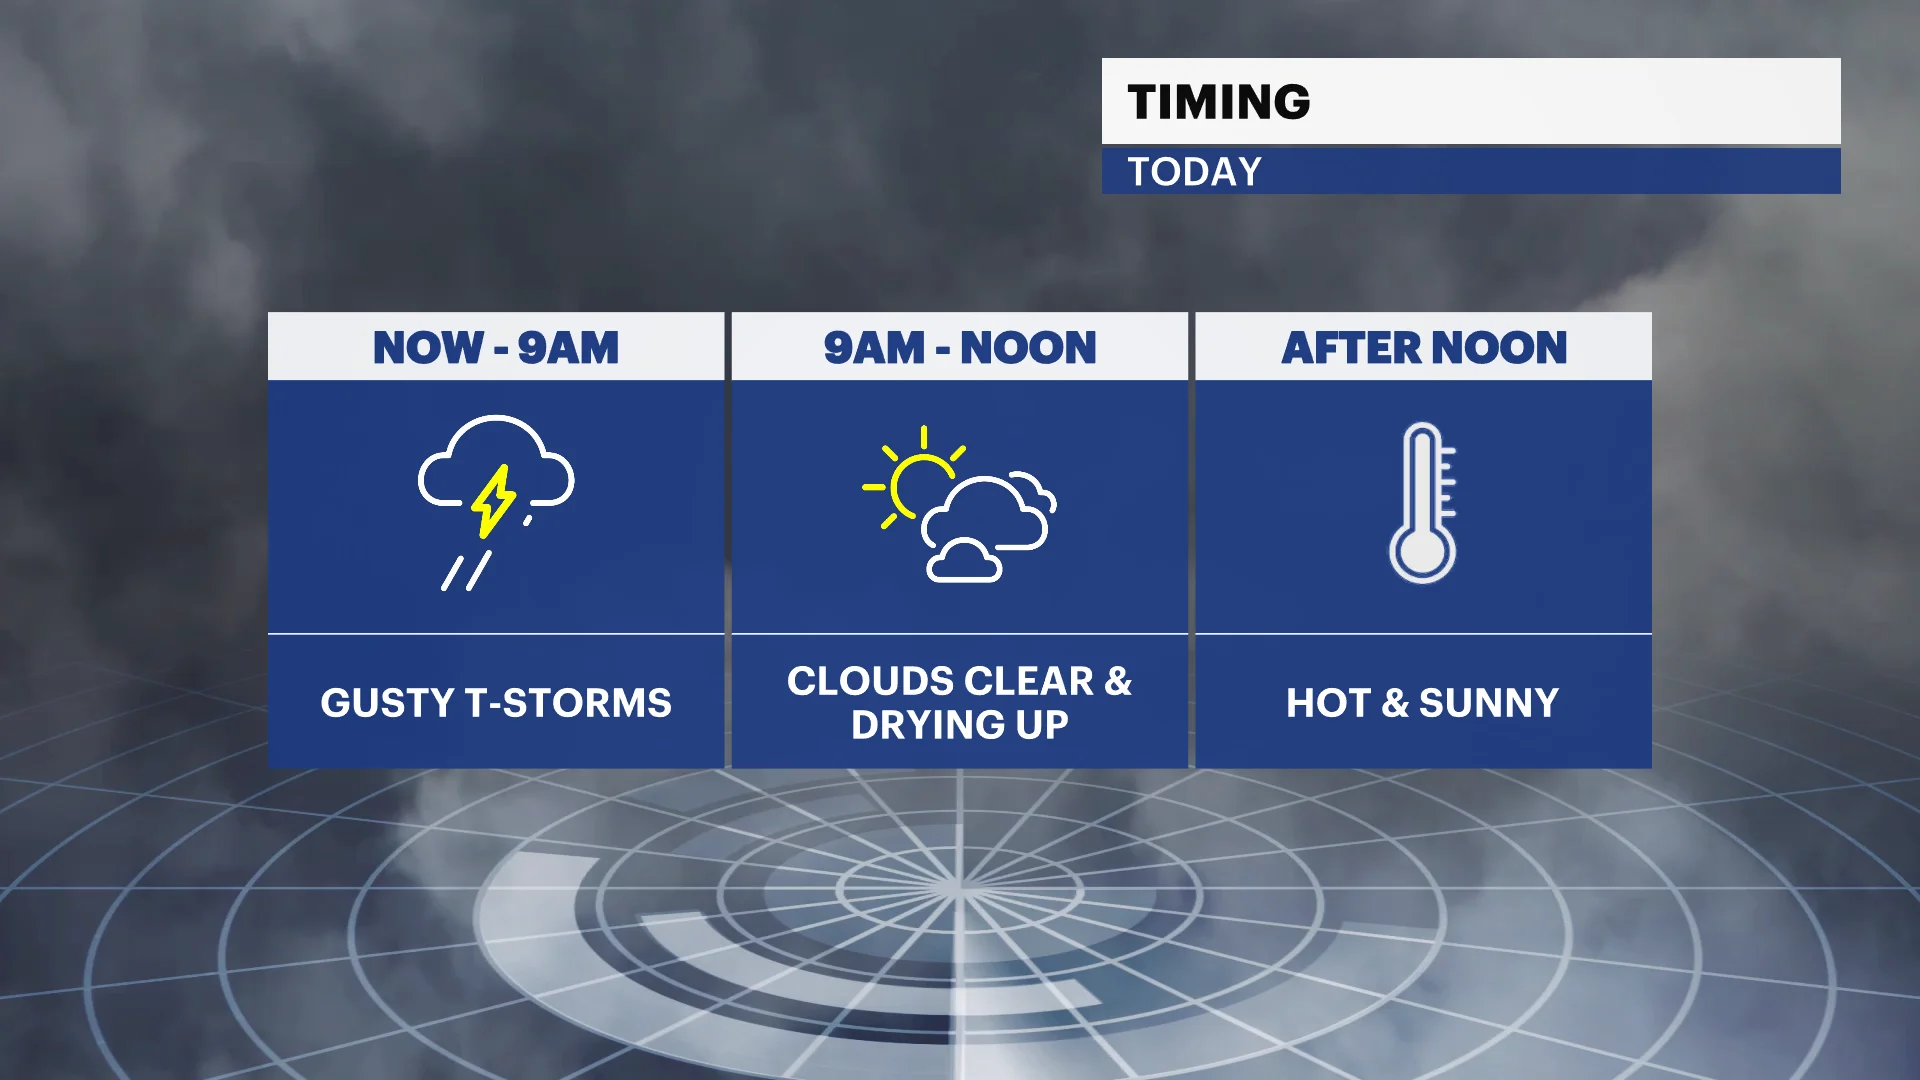 STORM WATCH: Early morning storms, conditions improve in the afternoon with temps in mid-80s